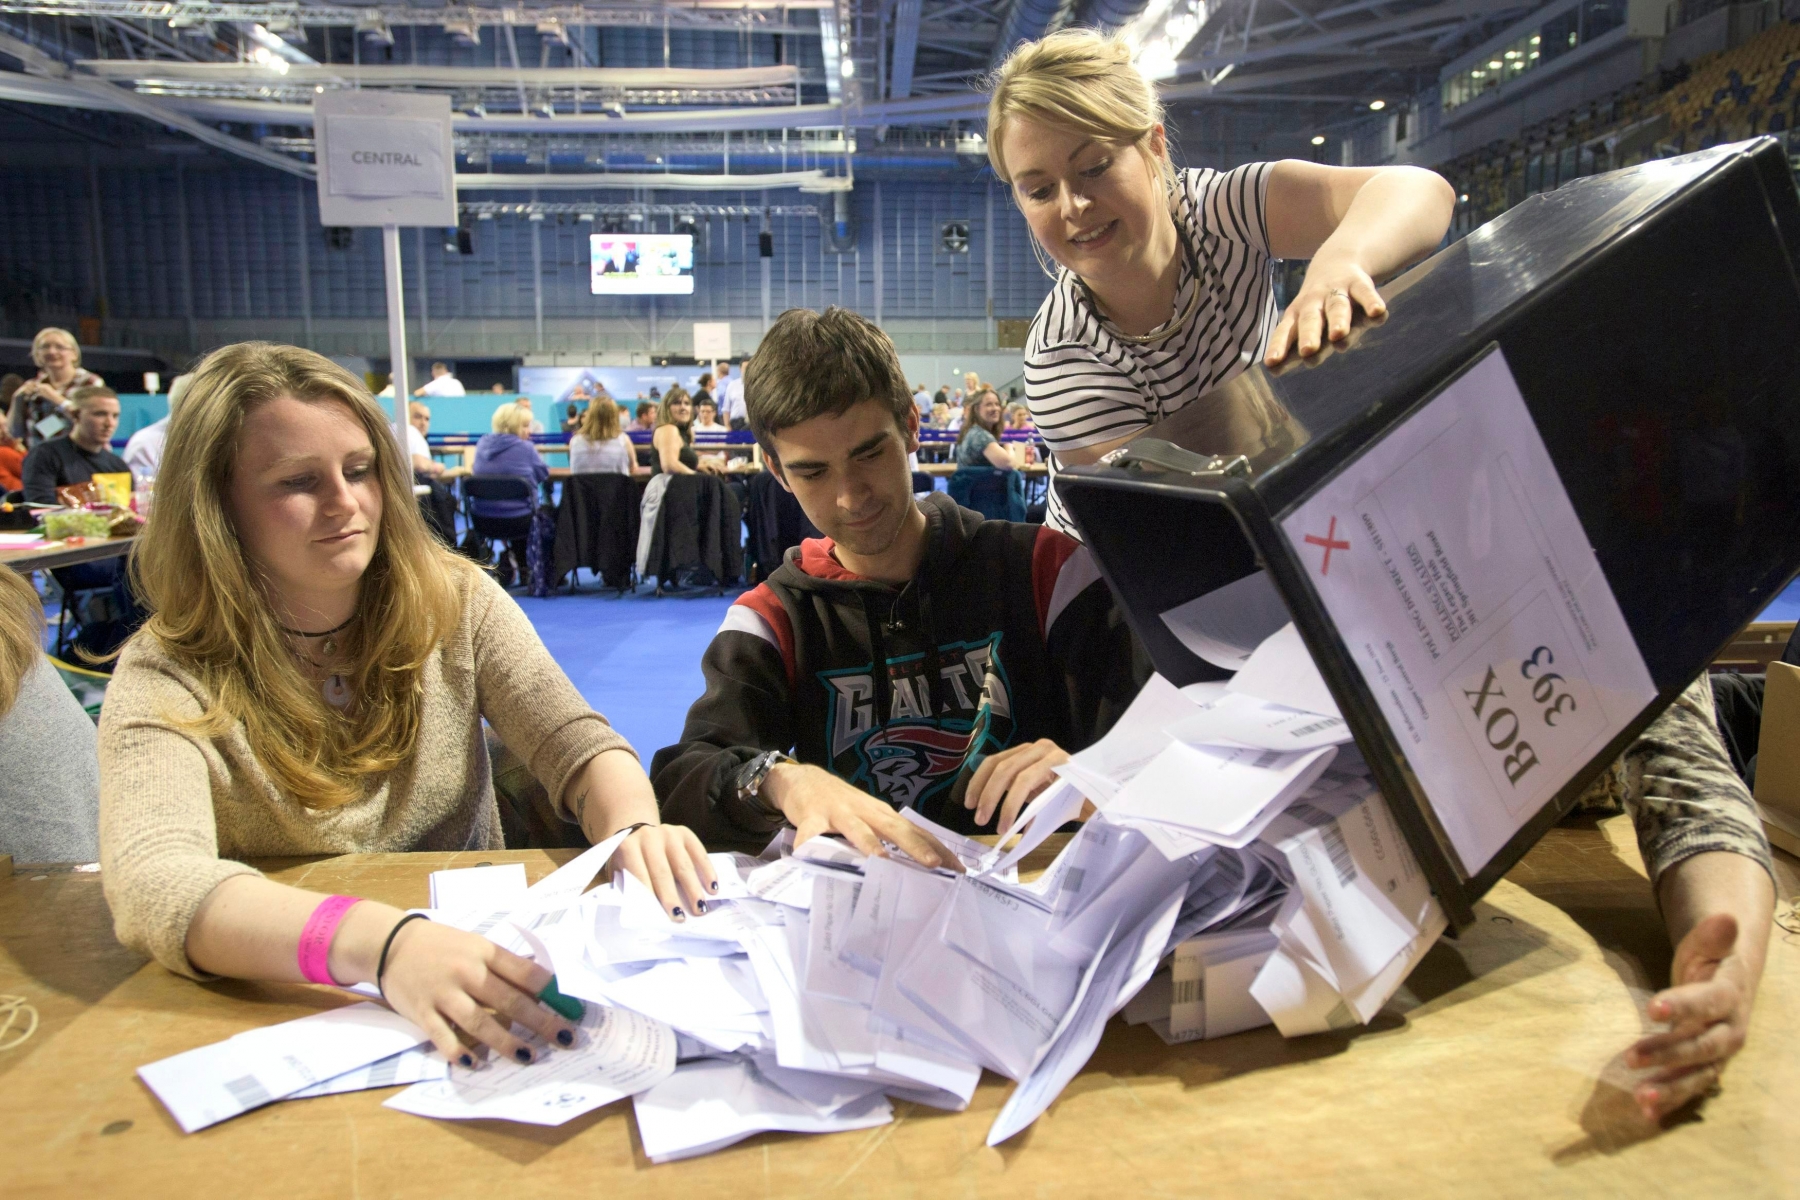 CORRECTS PLACE AND CITY - A ballot box is opened for counting at Emirates Stadium in Glasgow after the polls closed in the referendum on the UK membership of the European Union, late Thursday, June 23, 2016. Britain's referendum on whether to leave the European Union was too close to call early Friday, with increasingly mixed signals challenging earlier indications that "remain" had won a narrow victory. (John Linton/PA via AP) UNITED KINGDOM OUT NO SALES NO ARCHIVE CORRECTION Britain EU